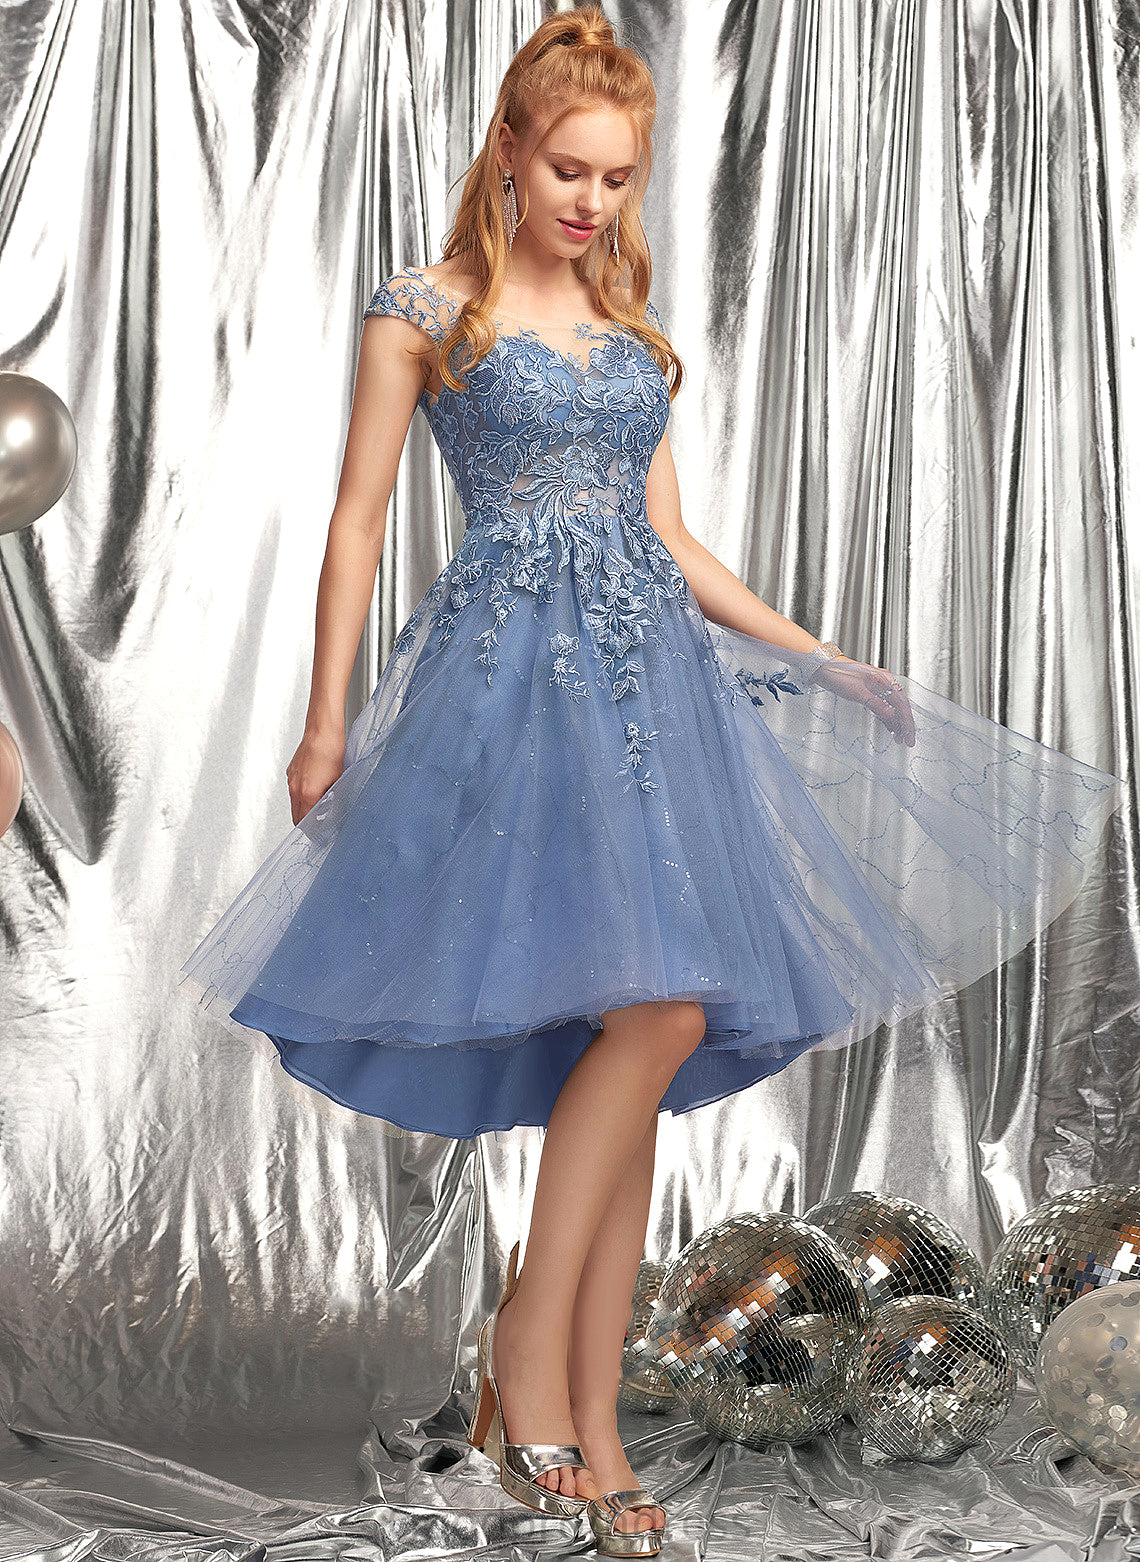 Lace Sequins Homecoming Homecoming Dresses Dress Aniya Scoop Asymmetrical With A-Line Neck Tulle